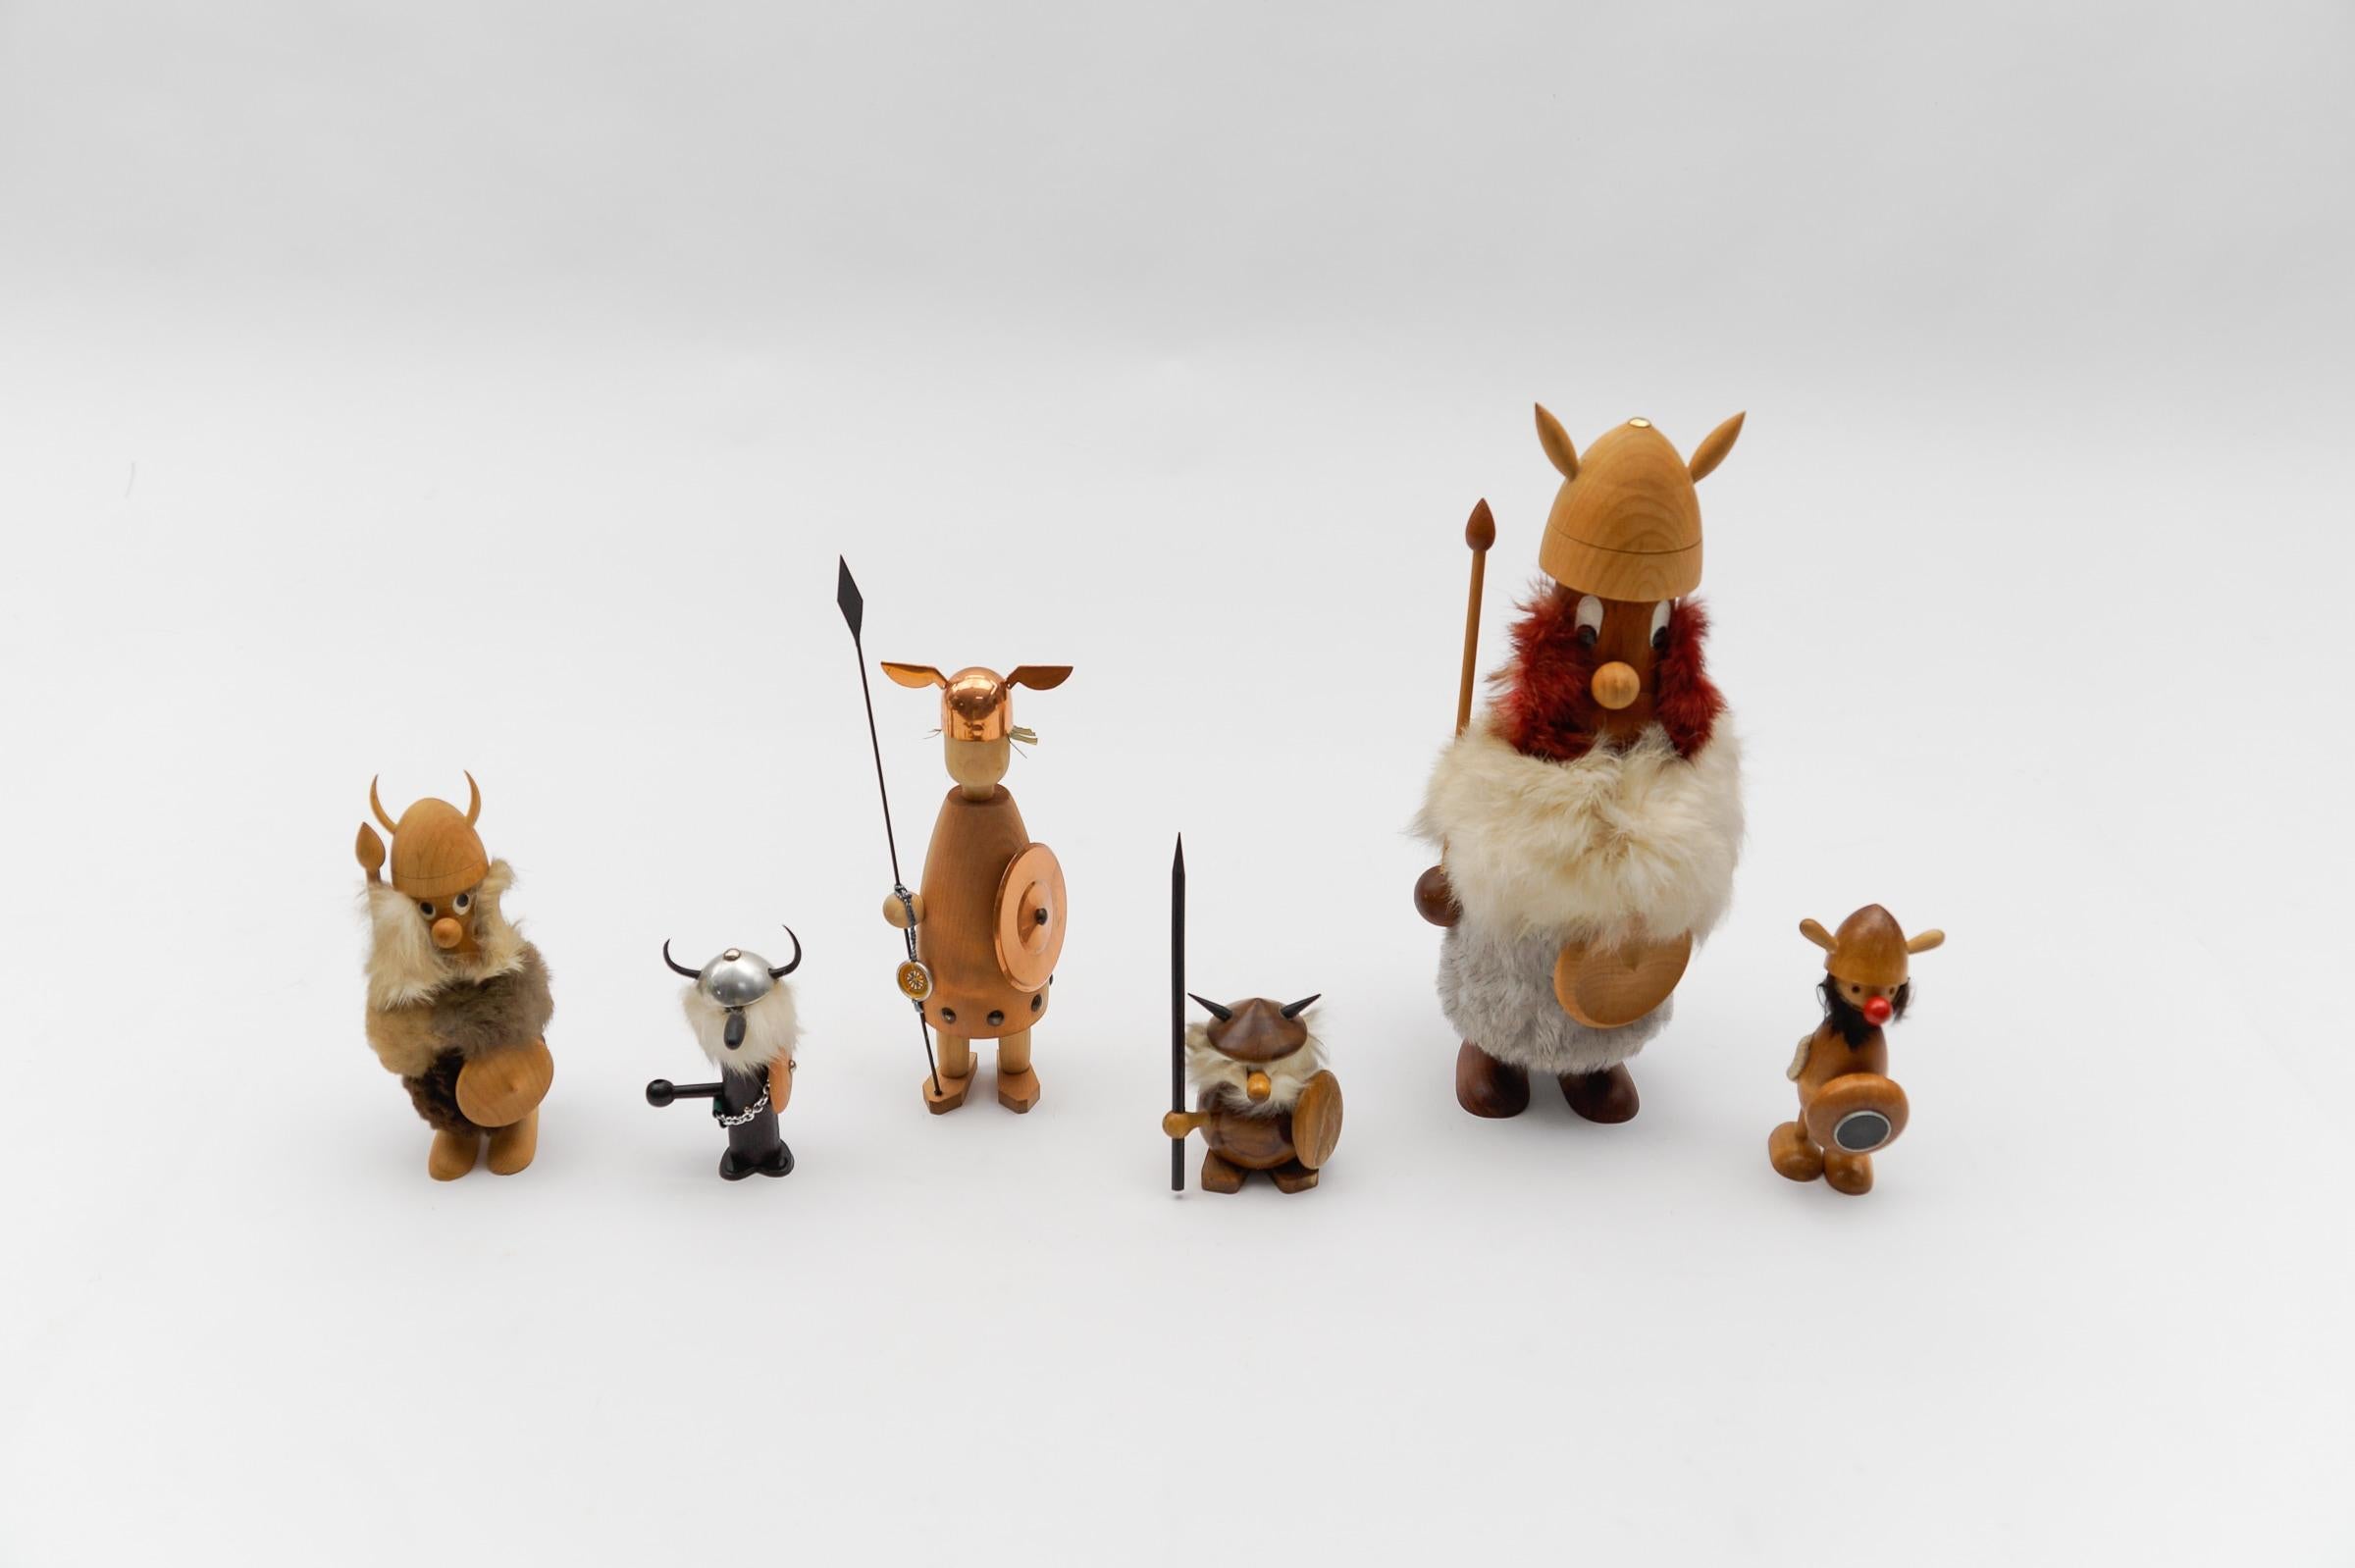 Fantastic collection of 6 different Scandinavian Vikings. 

Measures: The largest is 33.5 cm high. The others are 22 cm, 18 cm, 13.5 cm and 9 cm high.